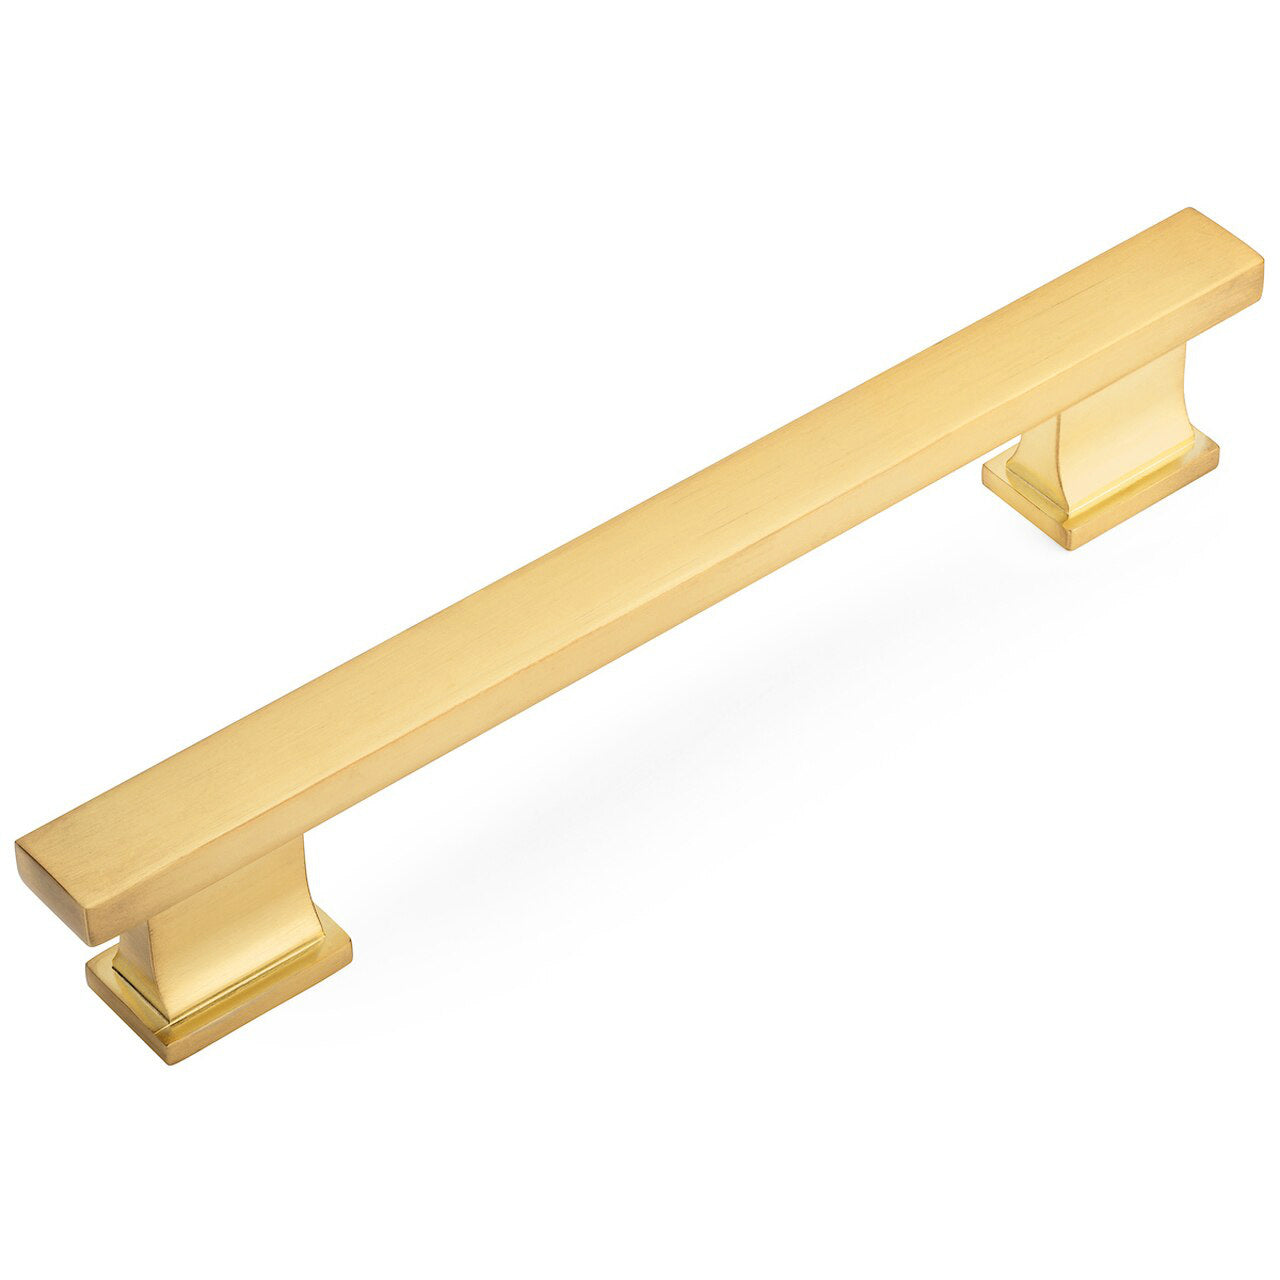 Cosmas 702-160BB Brushed Brass Contemporary Cabinet Pull